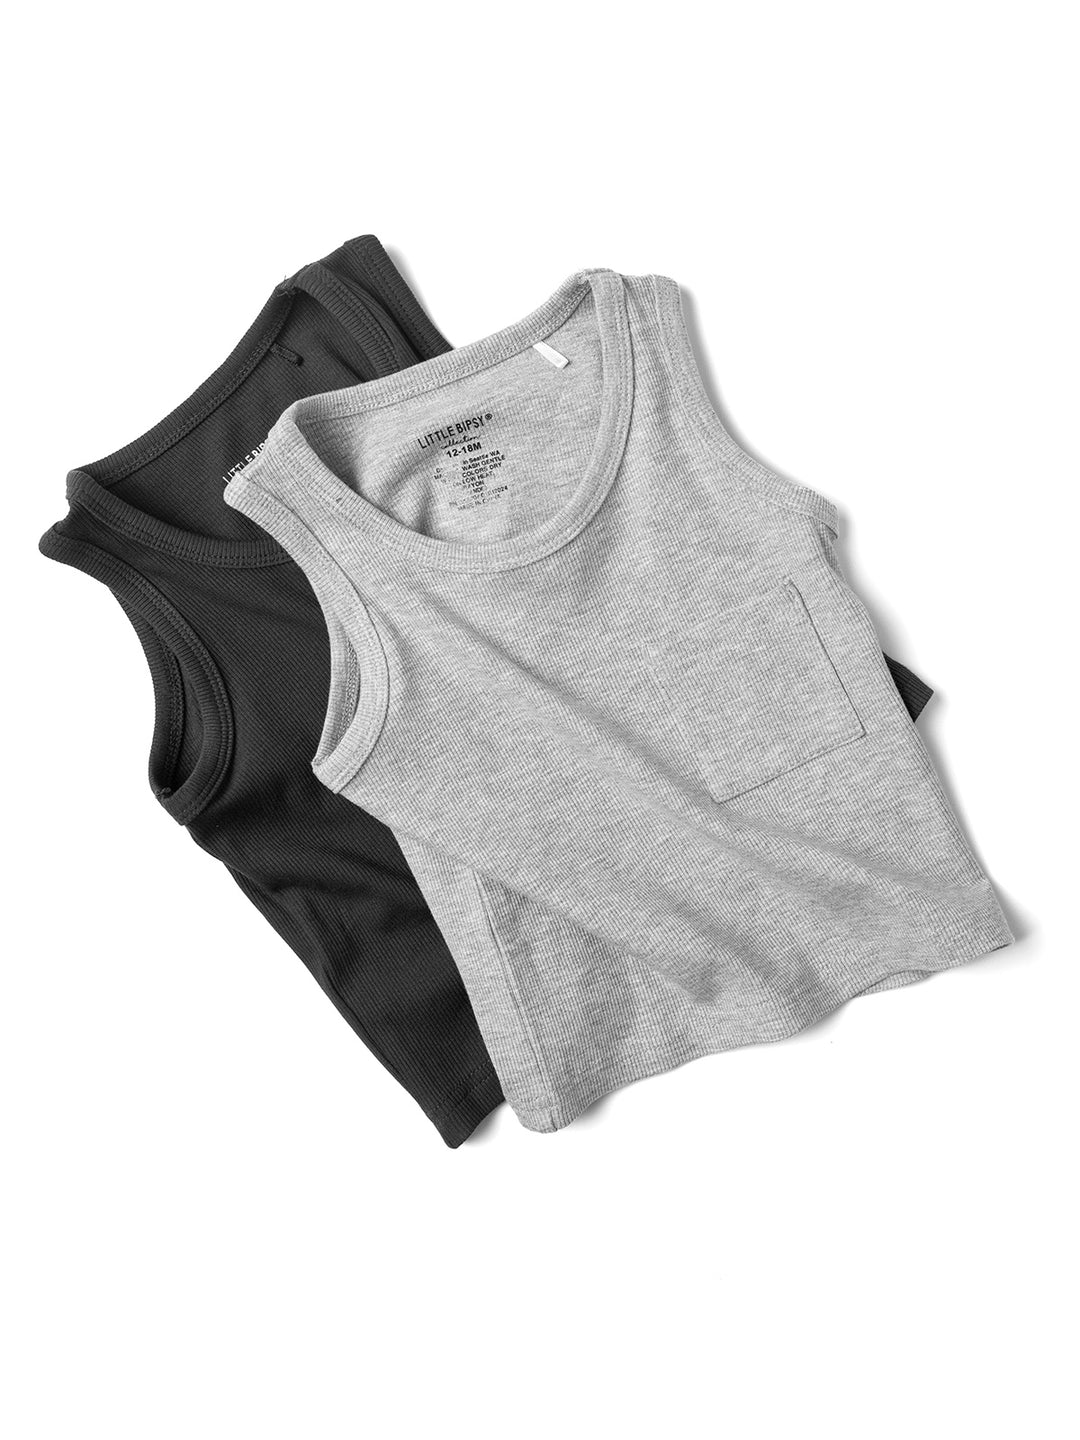 Little Bipsy Ribbed Tank in Charcoal